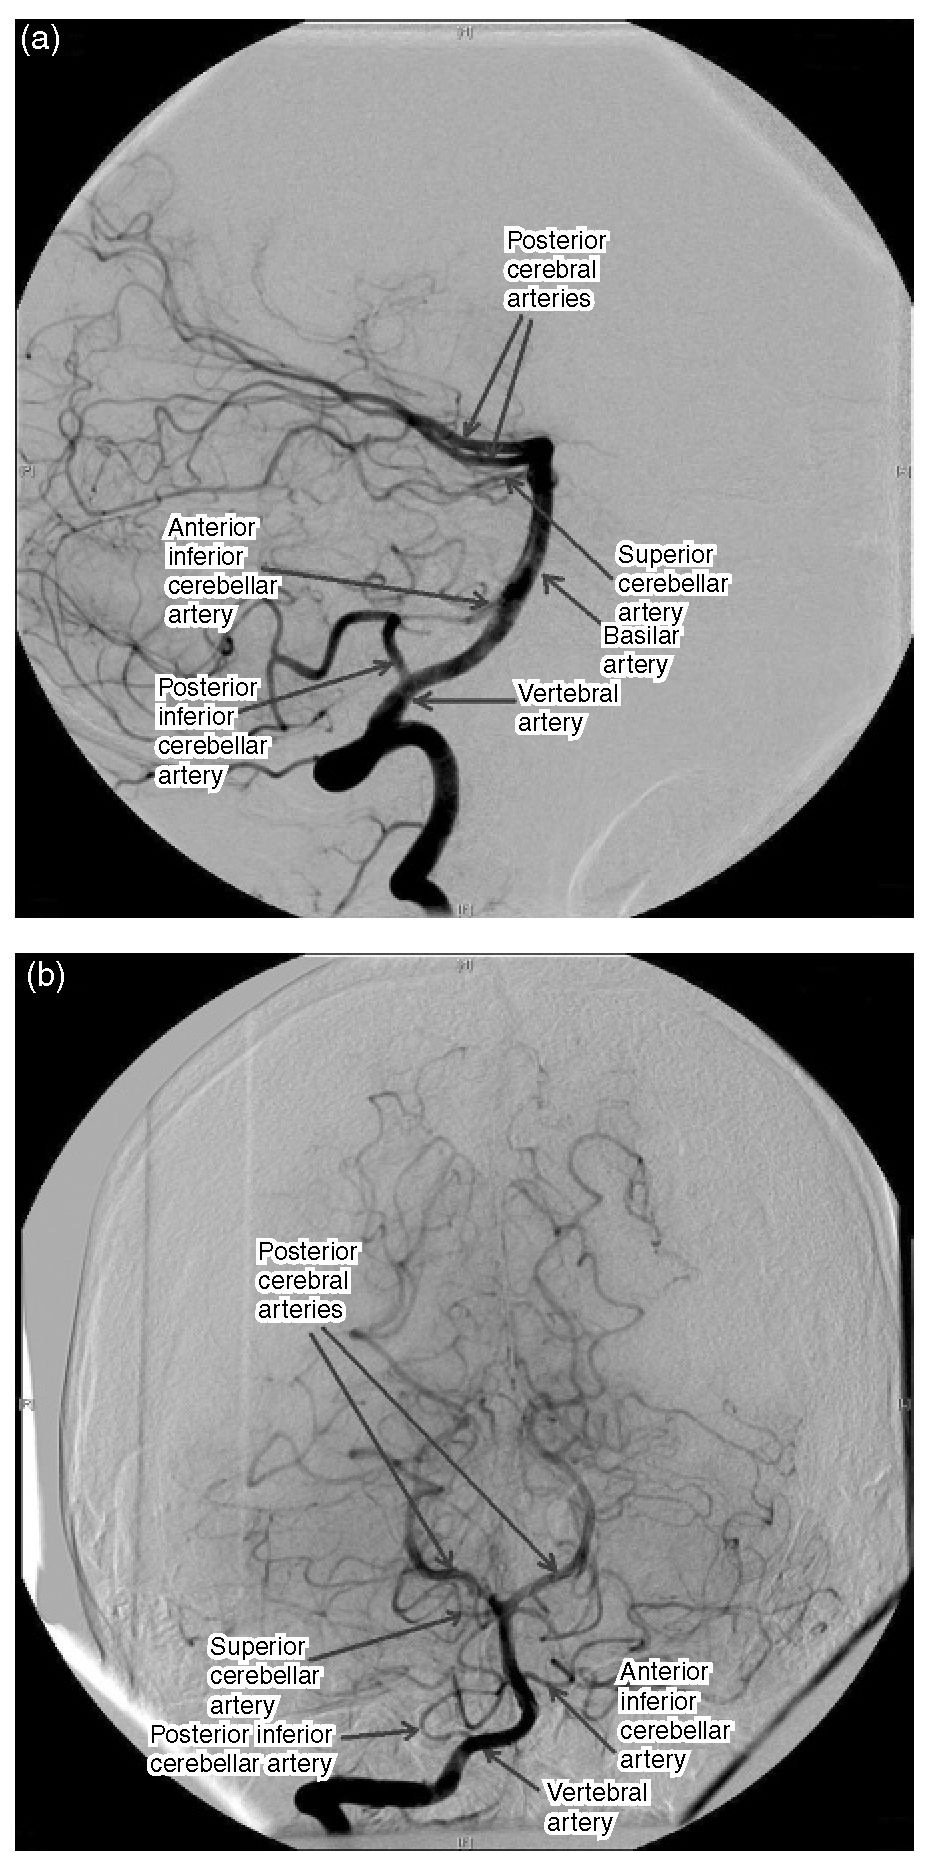 Subtraction angiogram oft he vertebral circulation. (a) Lateral projection; (b) anteroposterior projection. 